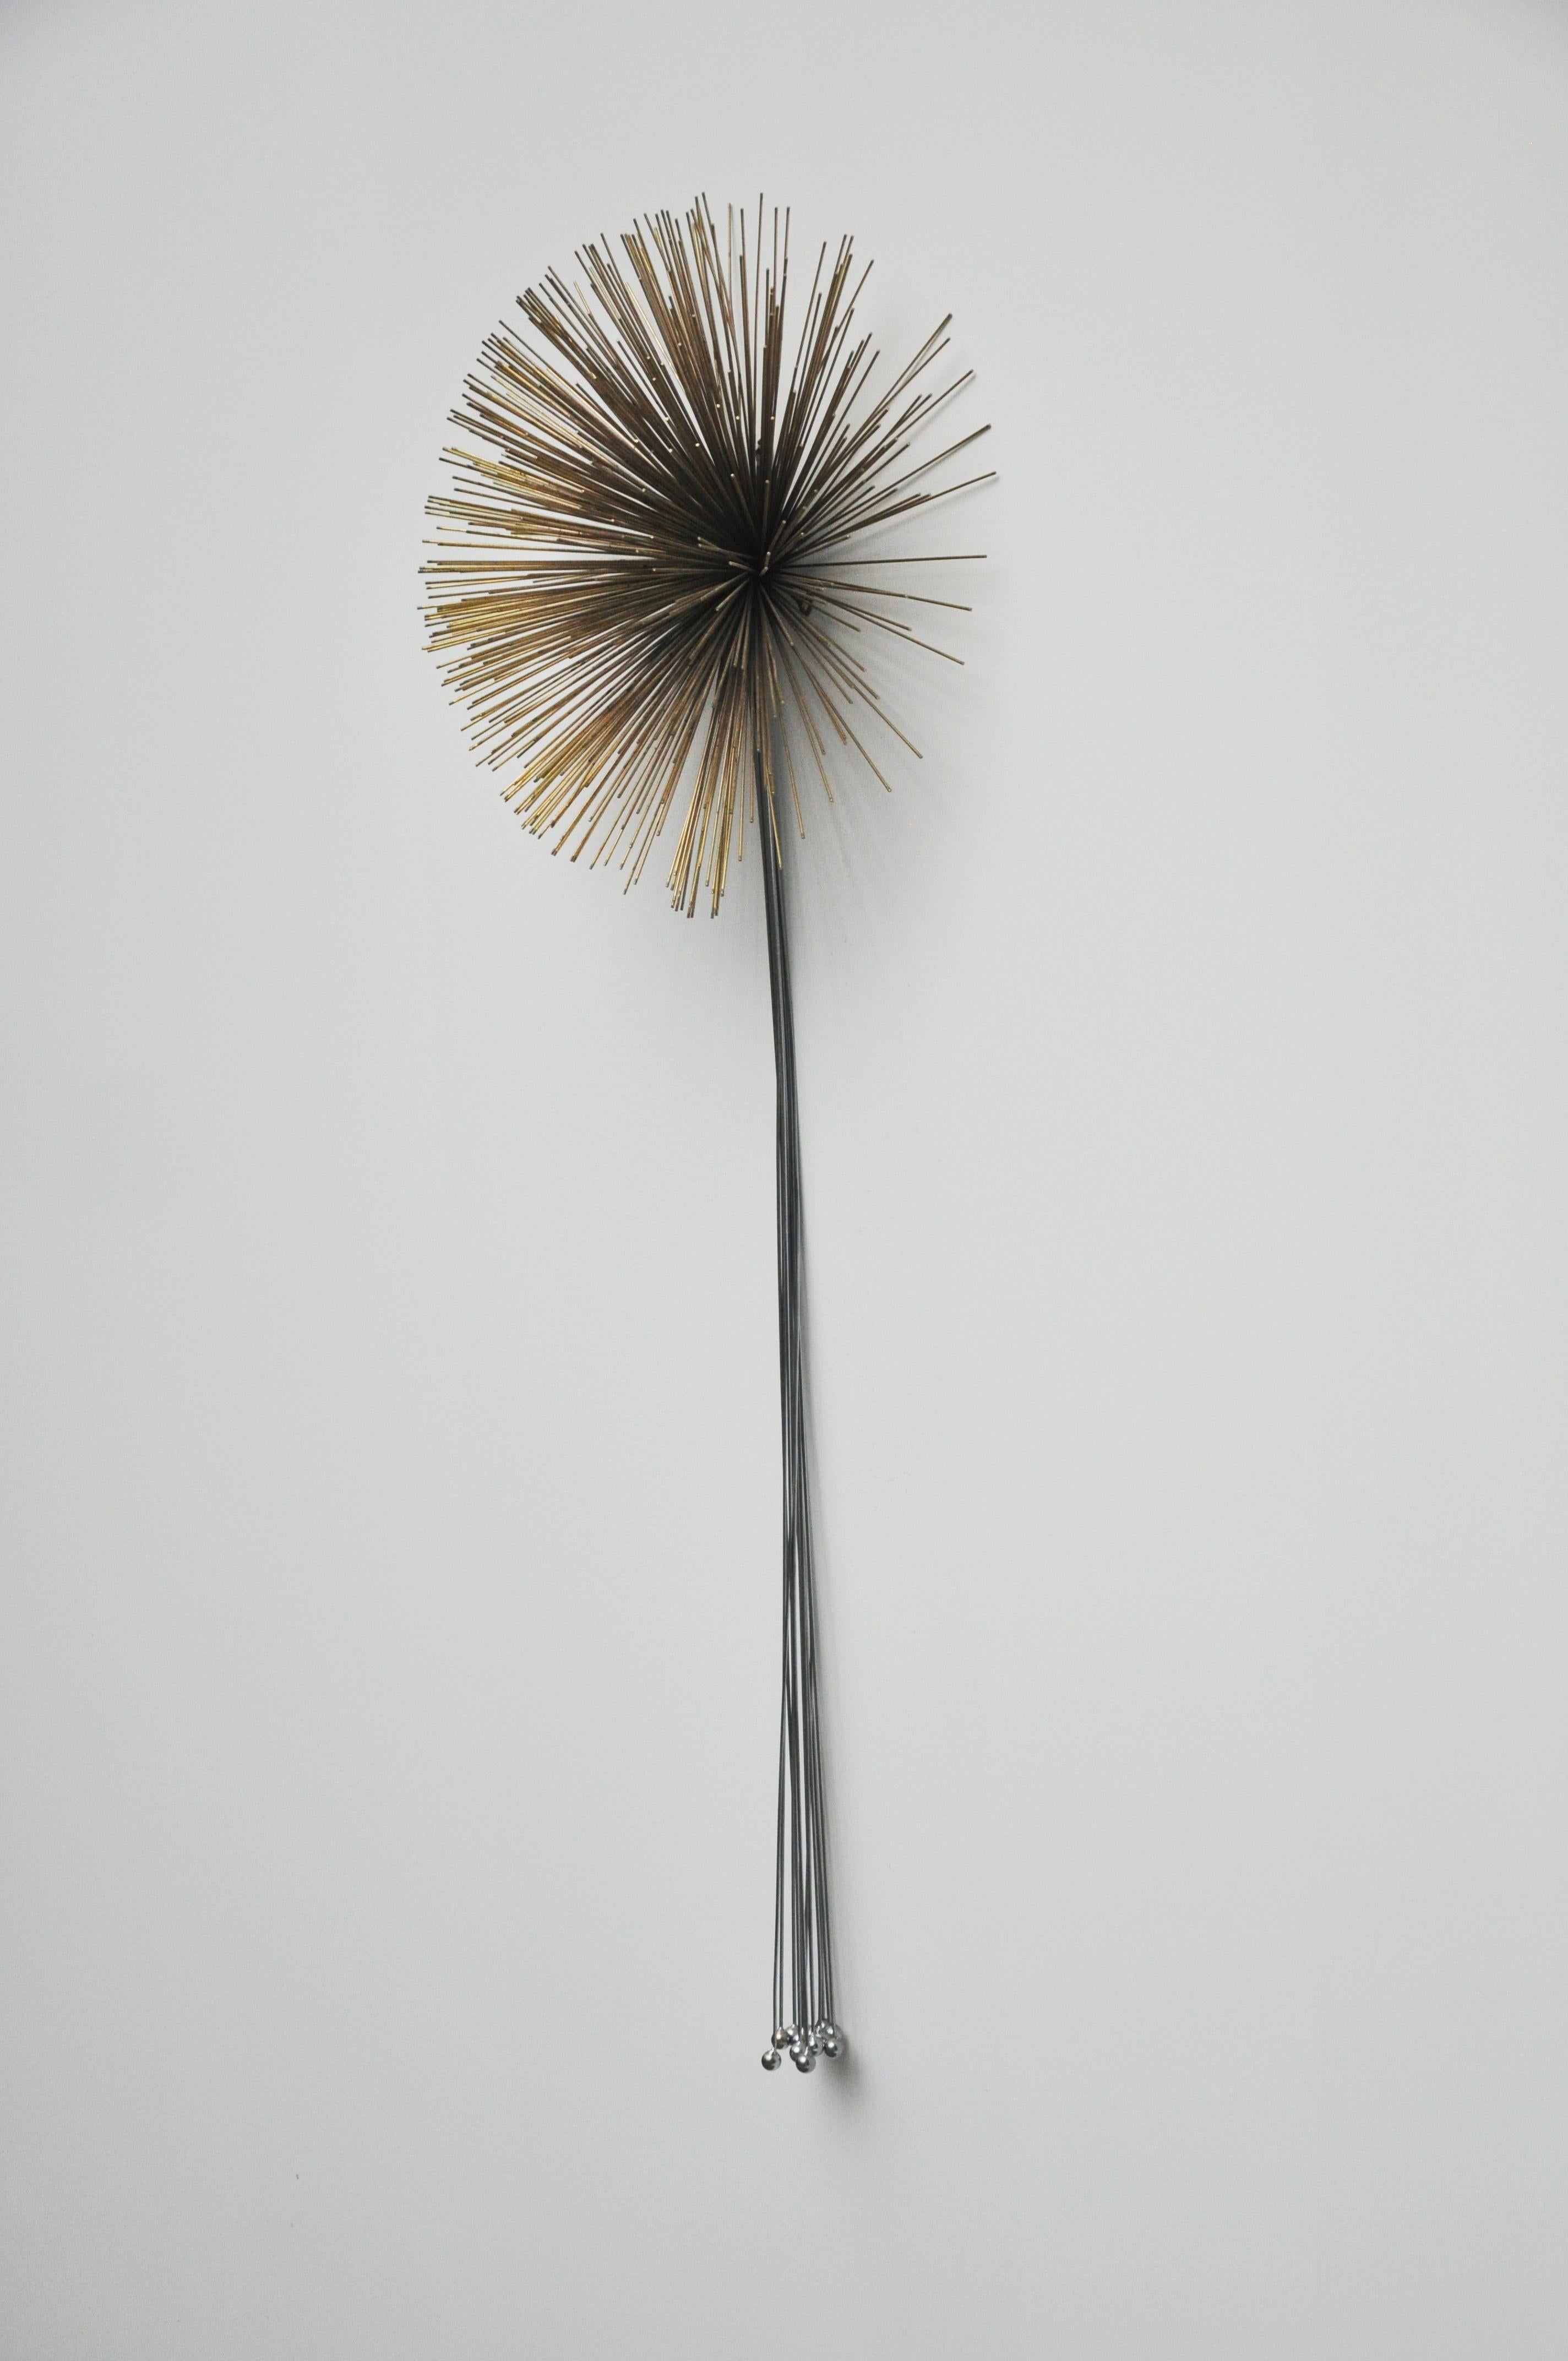 This wall sculpture was designed by Curtis Jere. The piece is a Mid-Century Modern and is created from mixed metals. It is created from thin metal rods welded together to make a dimensional starburst. The sculpture is signed and dated 1988.